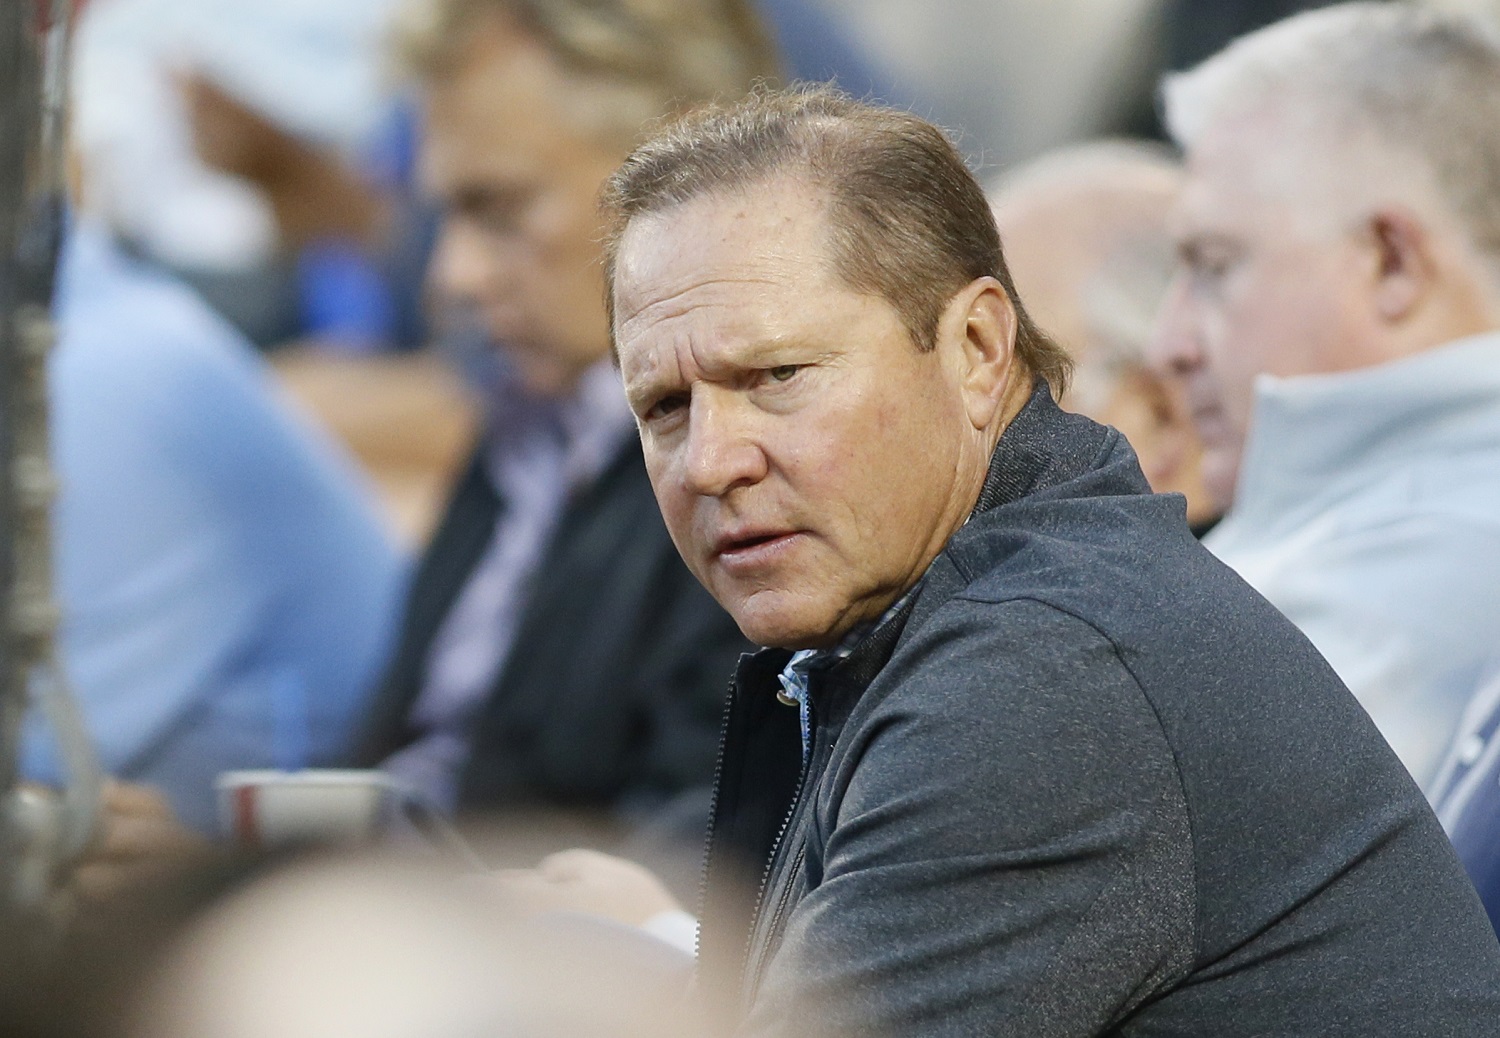 Sports agent Scott Boras attends the baseball game between the Los Angeles Dodgers and Washington Nationals, Tuesday, Aug. 11, 2015, in Los Angeles. (AP Photo/Danny Moloshok)